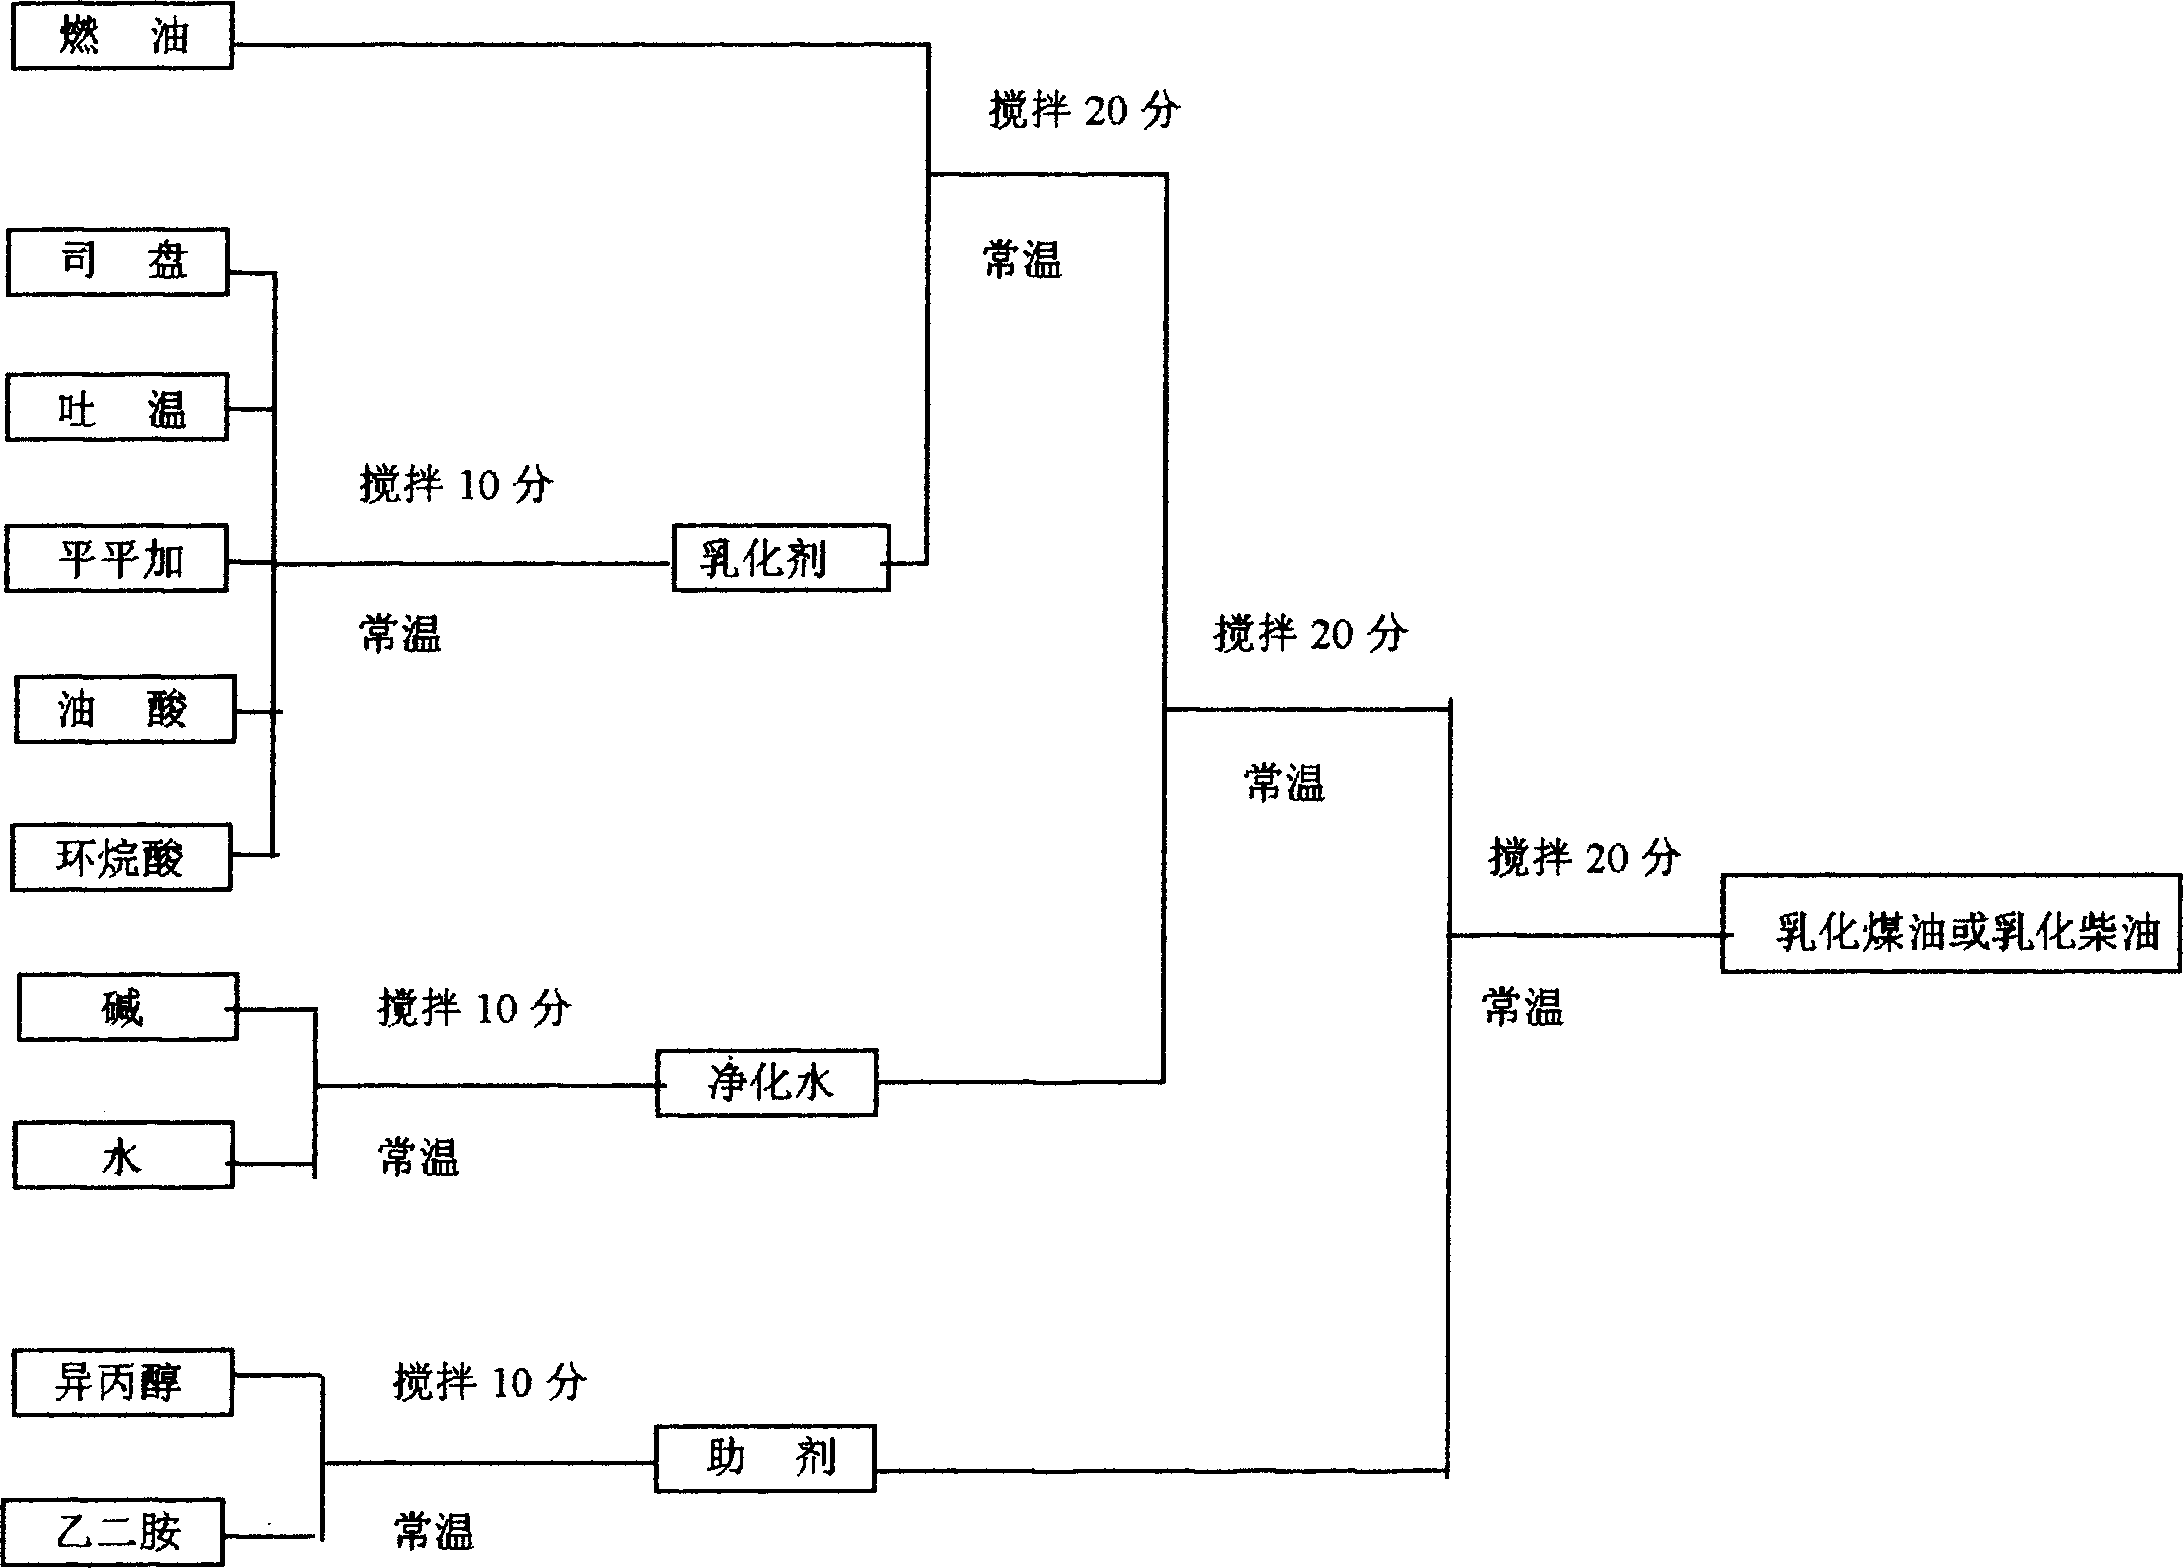 Micro emulsion fuel production process and formula